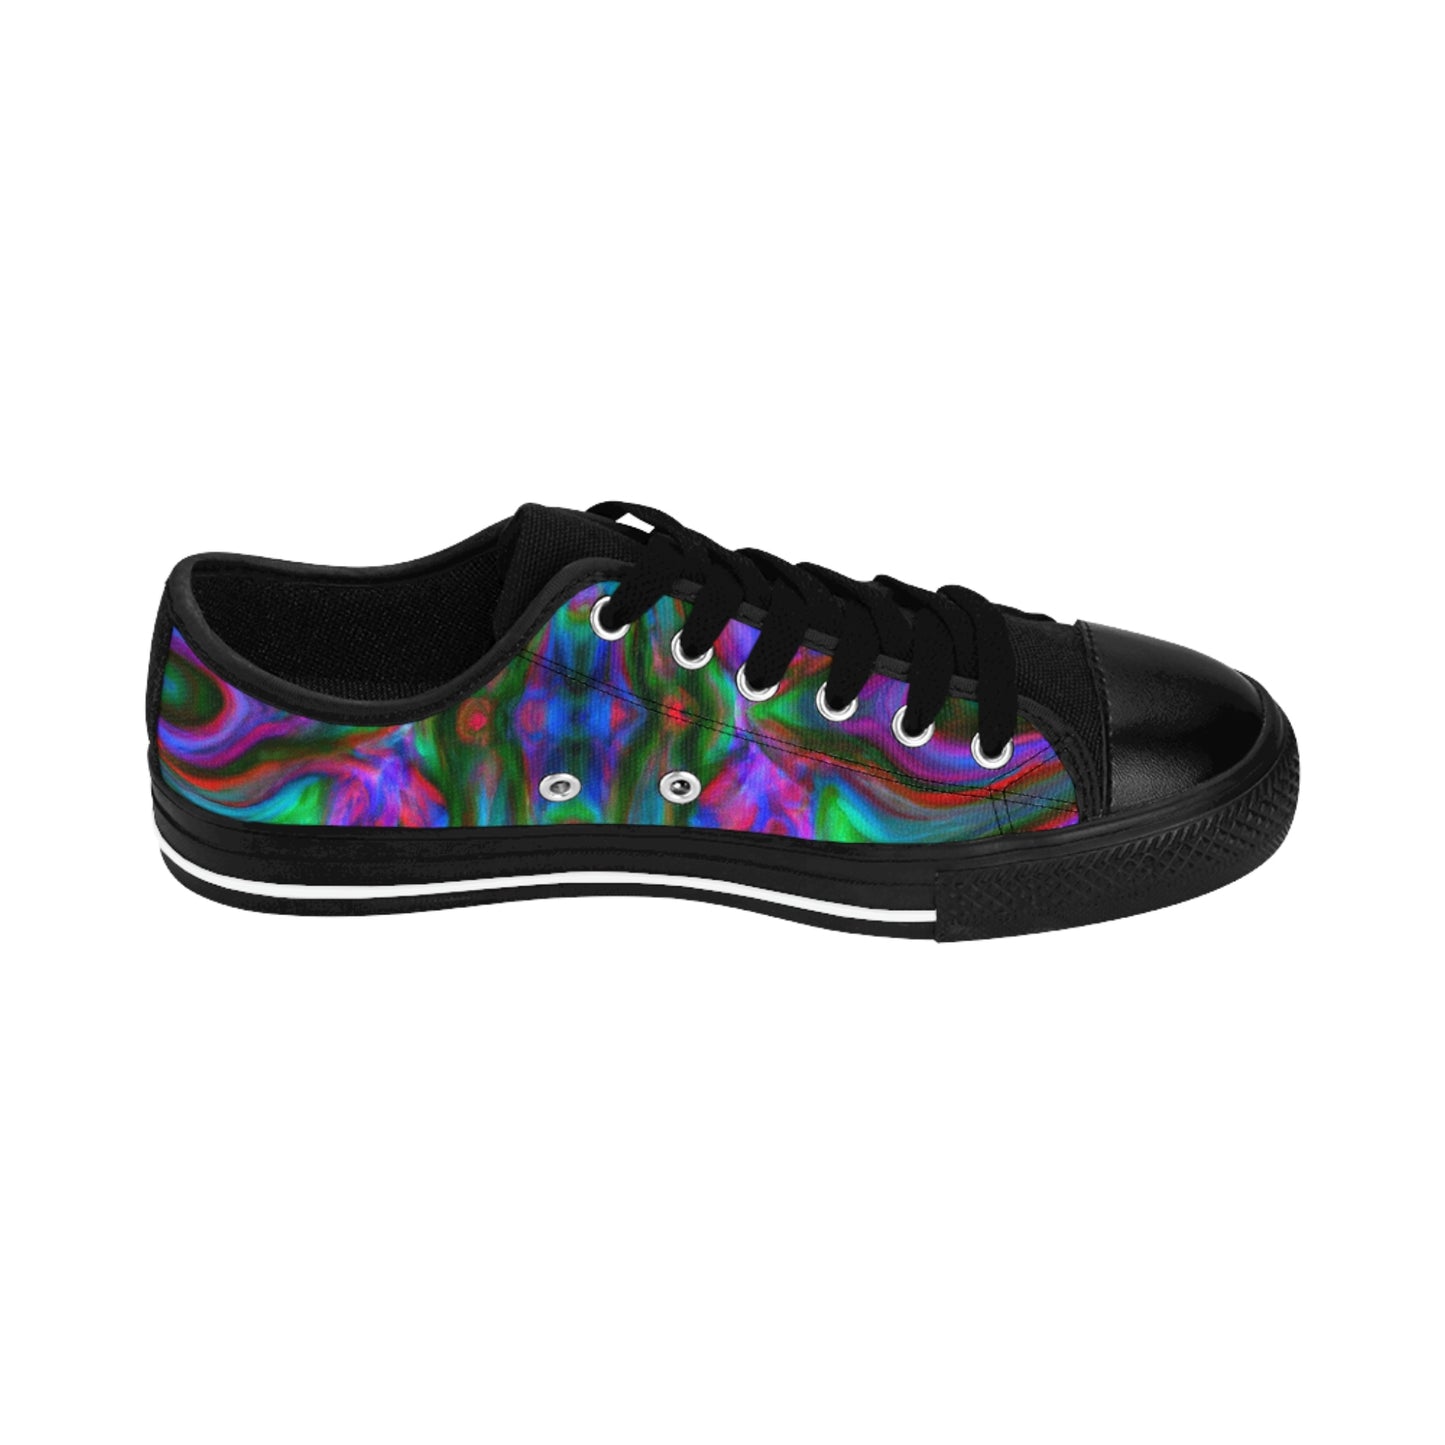 .

Kjul the Cobbler - Psychedelic Low Top